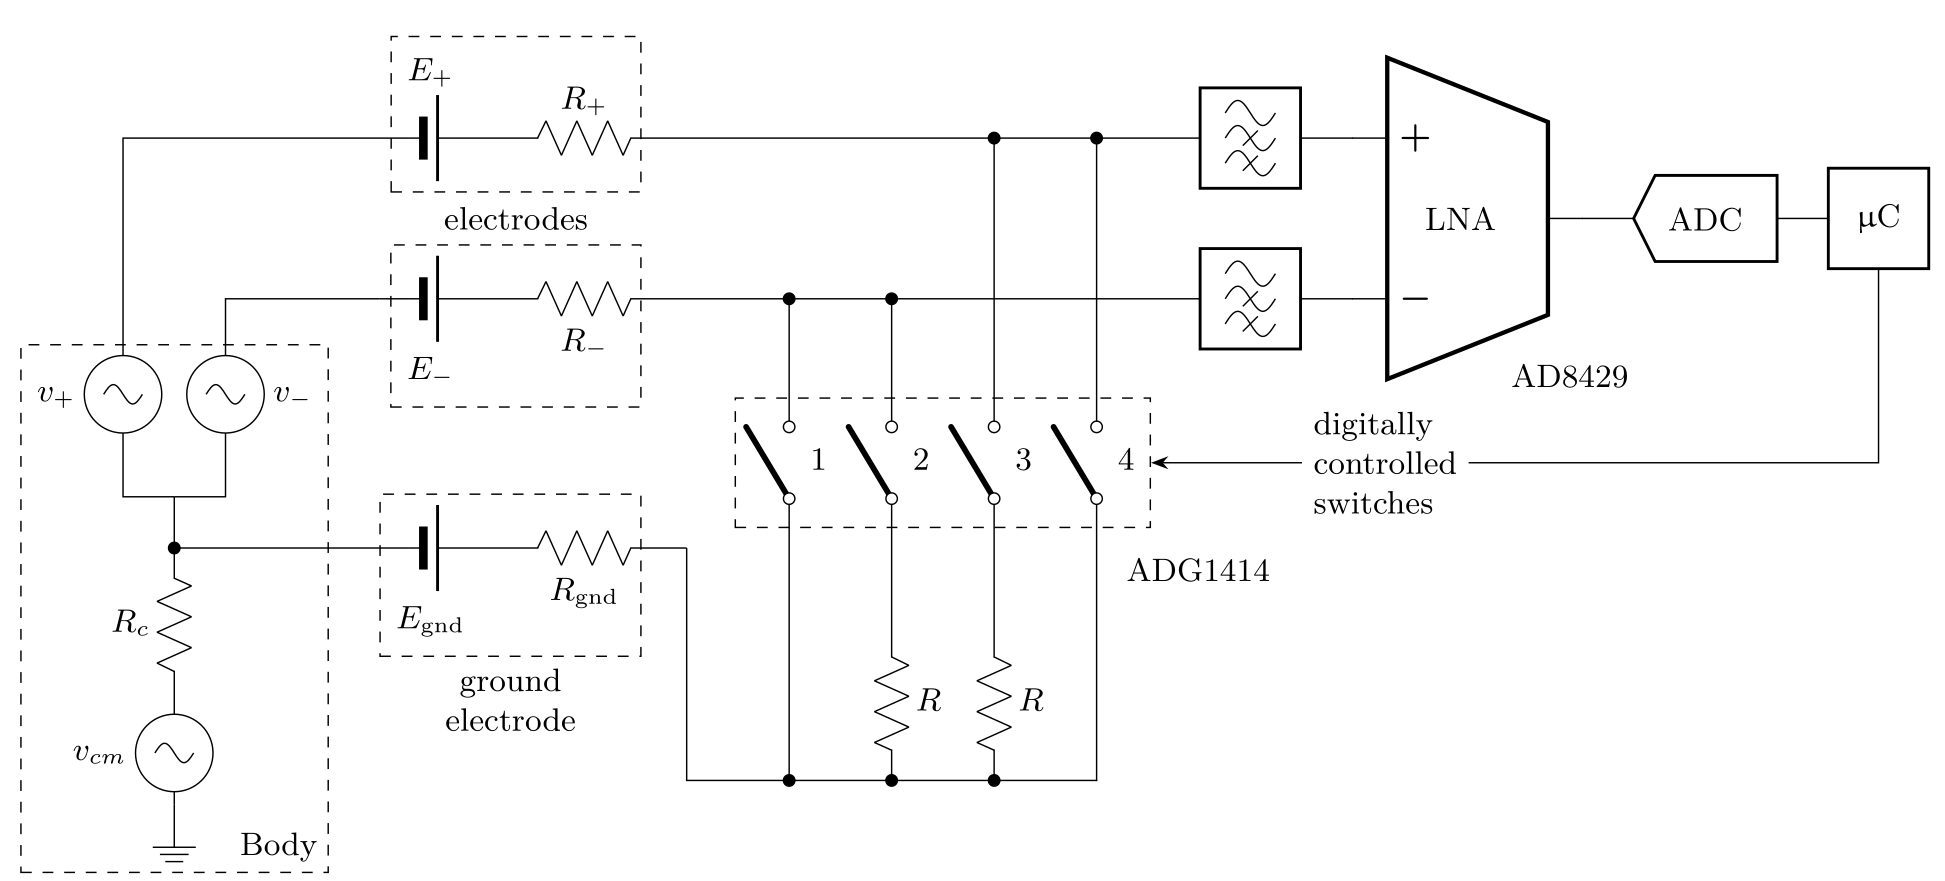 examle of a complex circuit